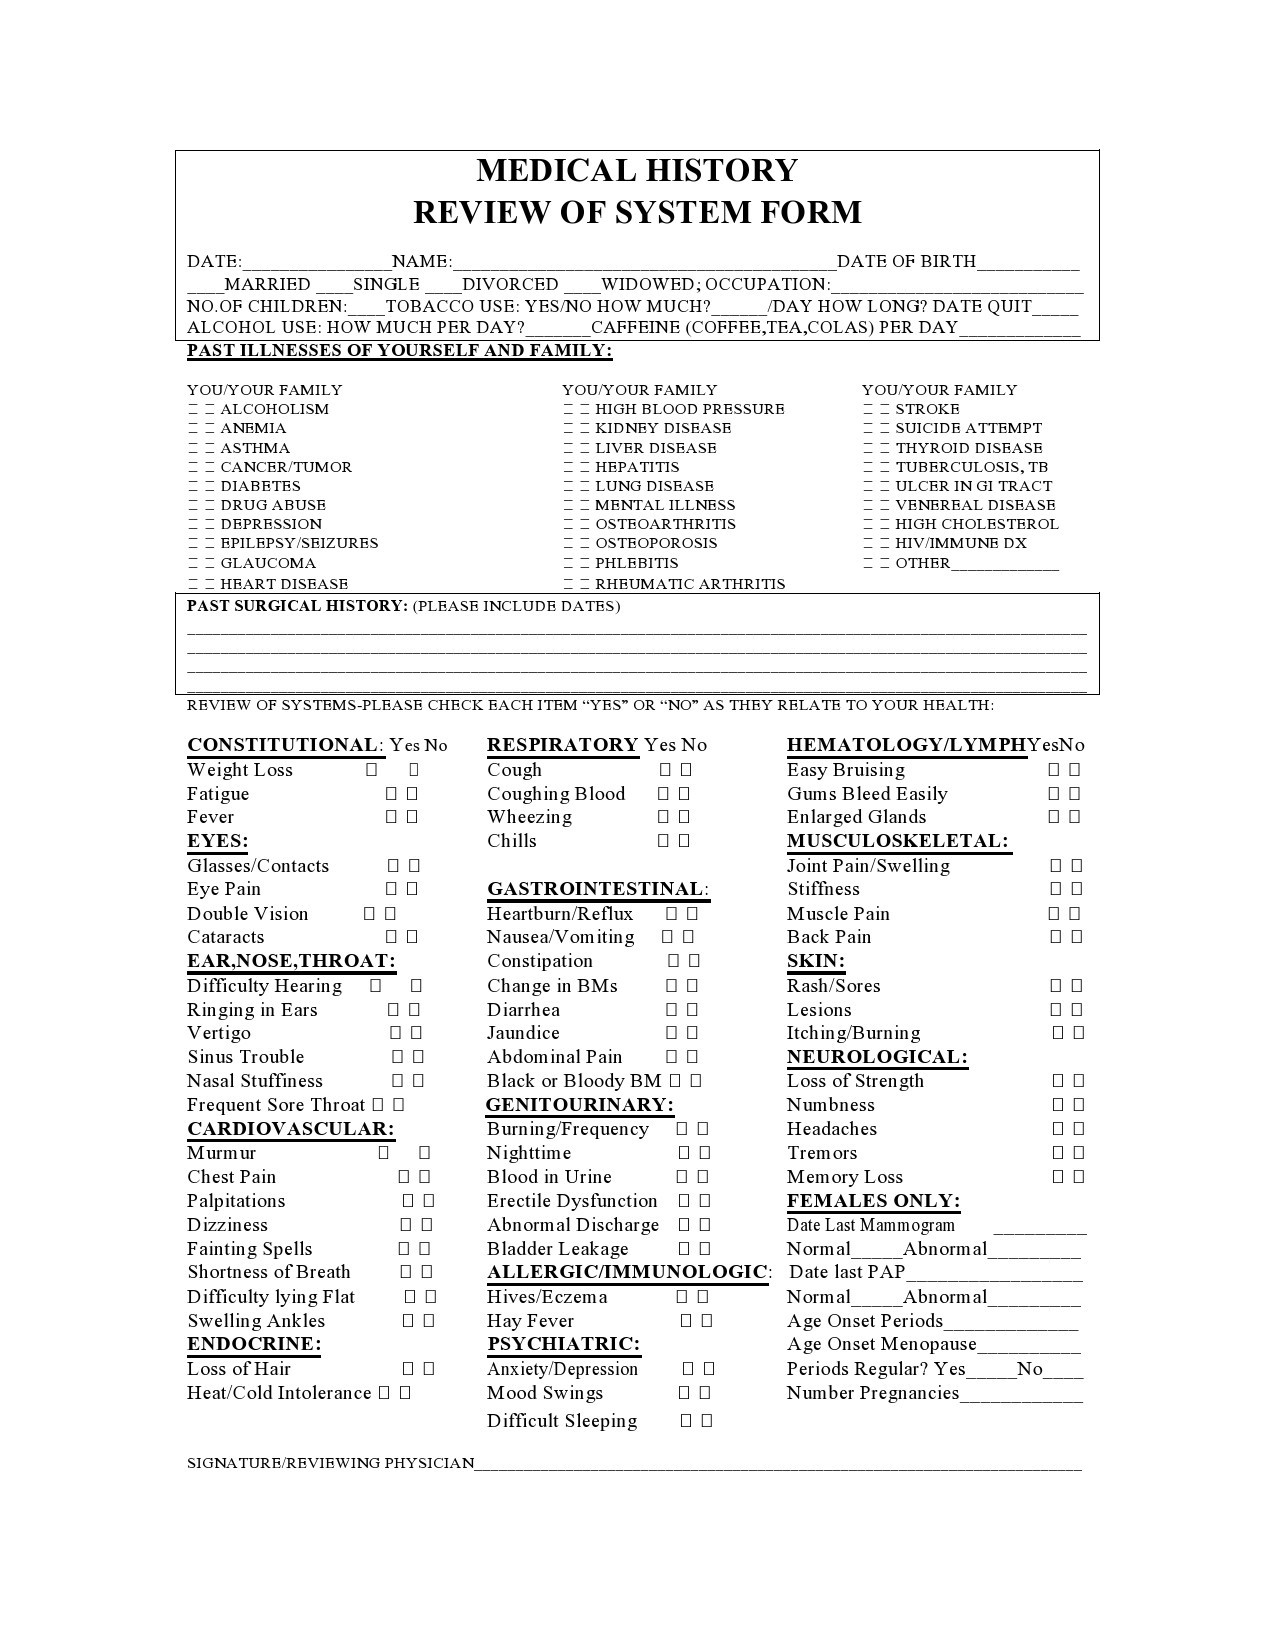 46 Free Review Of Systems Templates Checklist TemplateLab